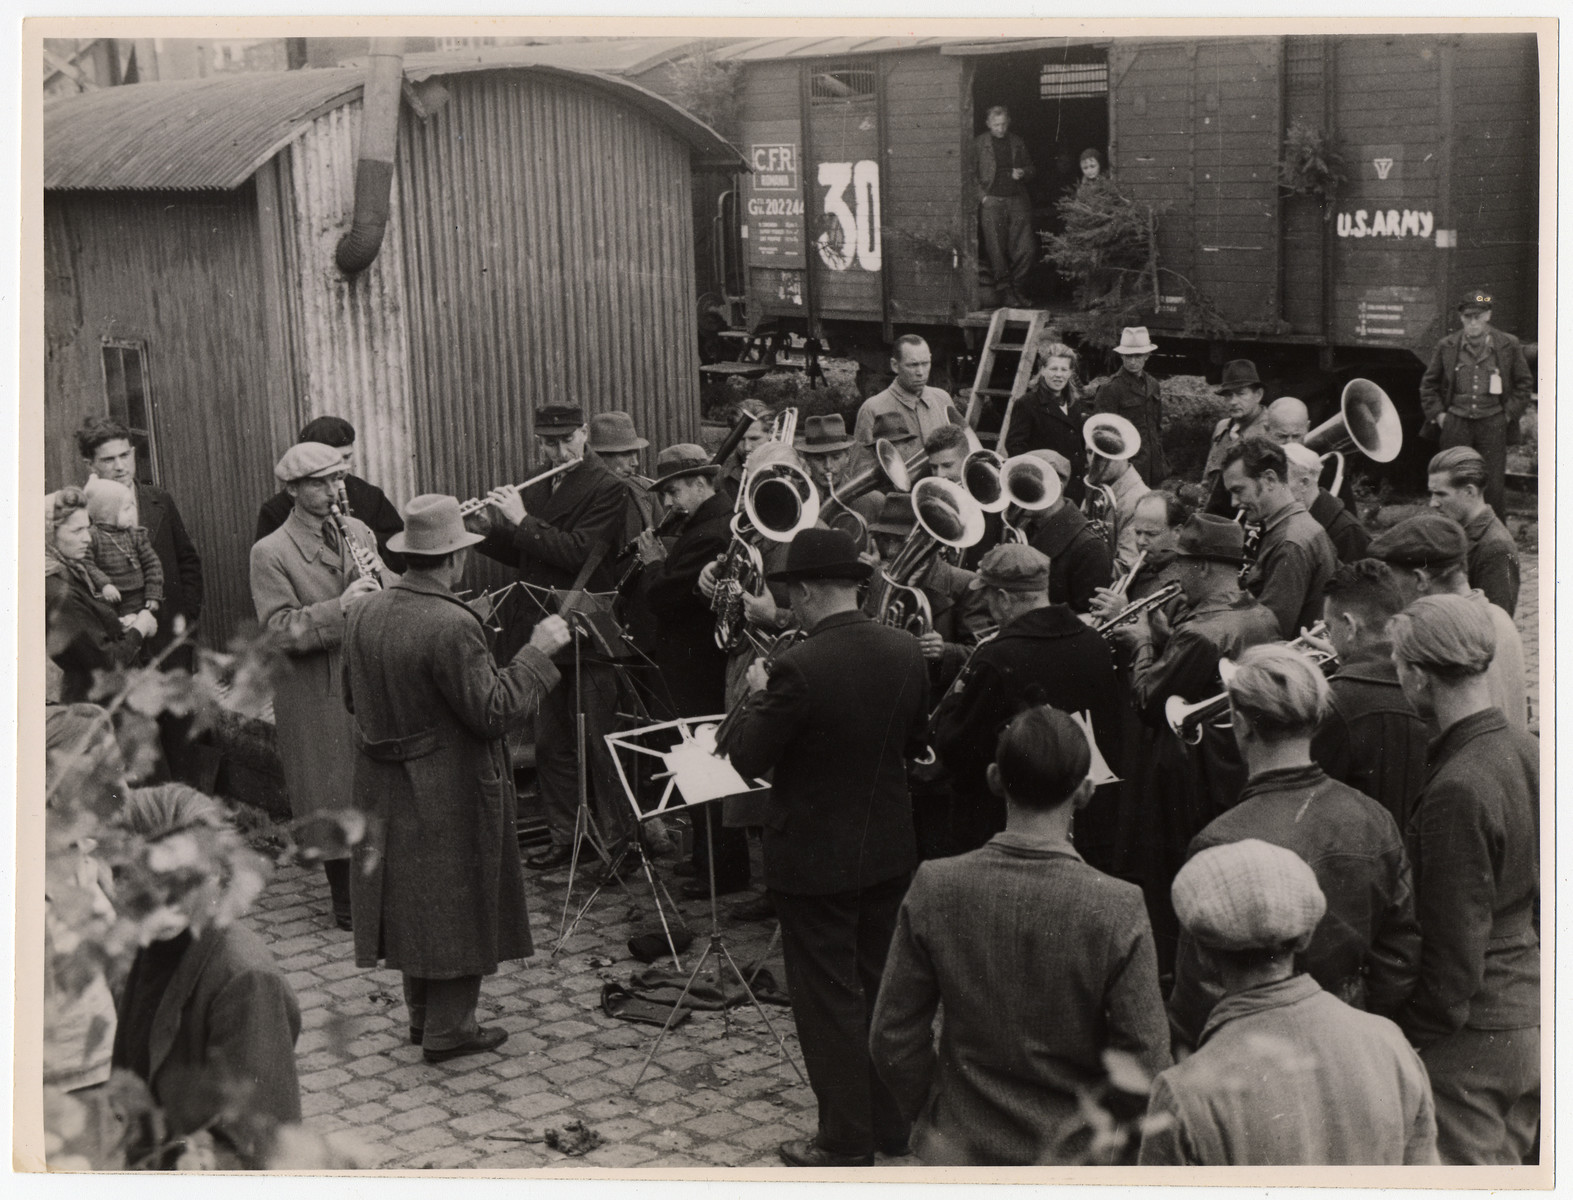 An orchestra performs at a train station as a send-off to a group of displaced persons leaving on a U.S. army train.